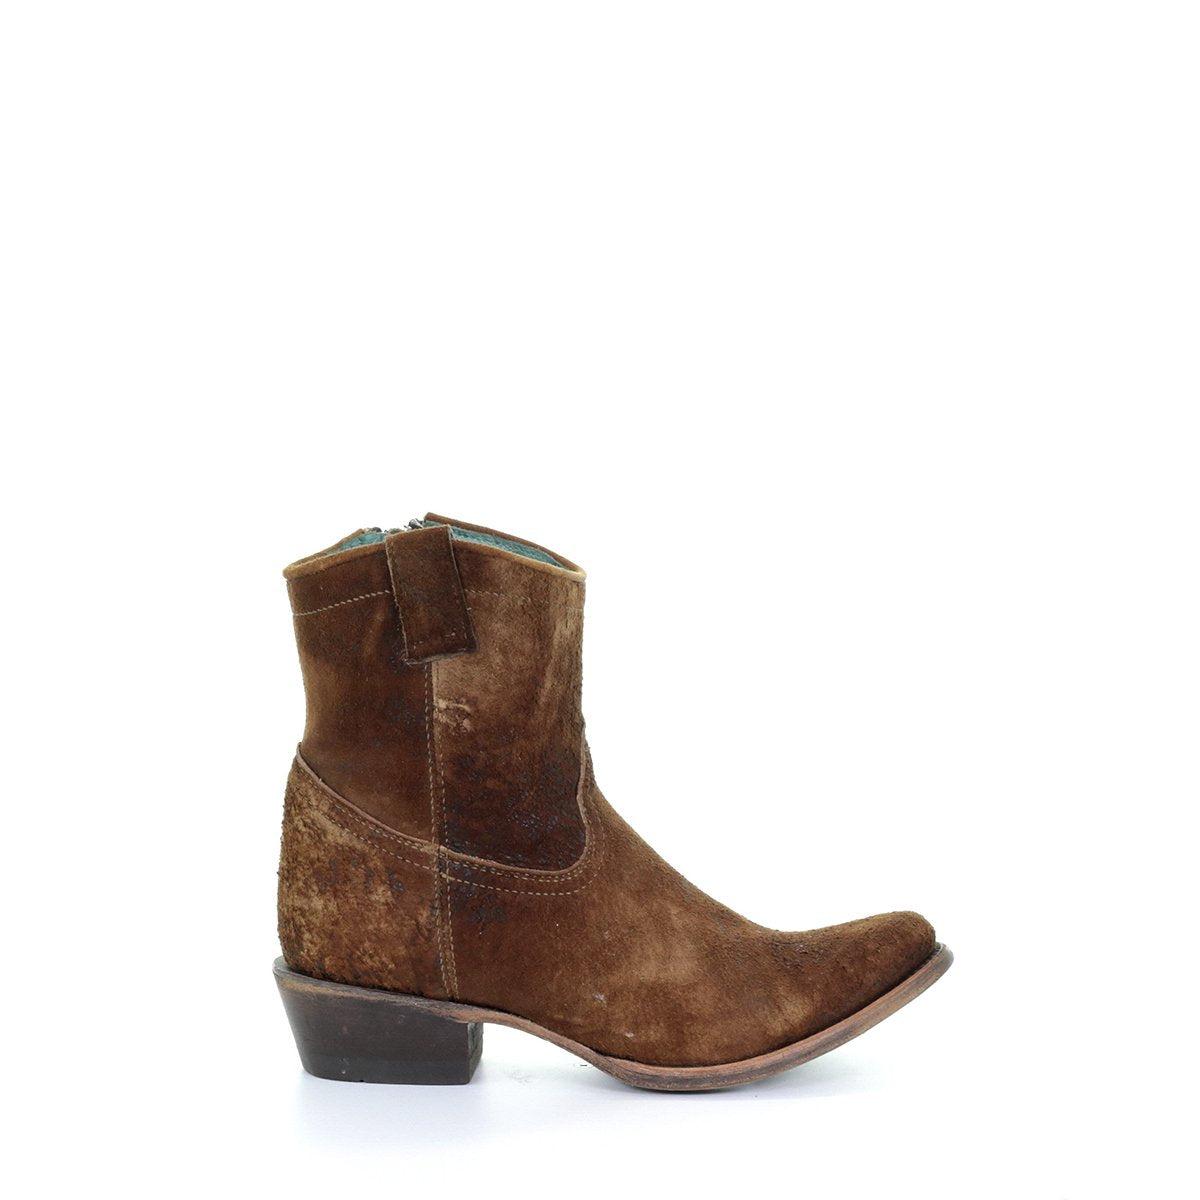 Chocolate Distressed Lamb Short Bootie, By Corral